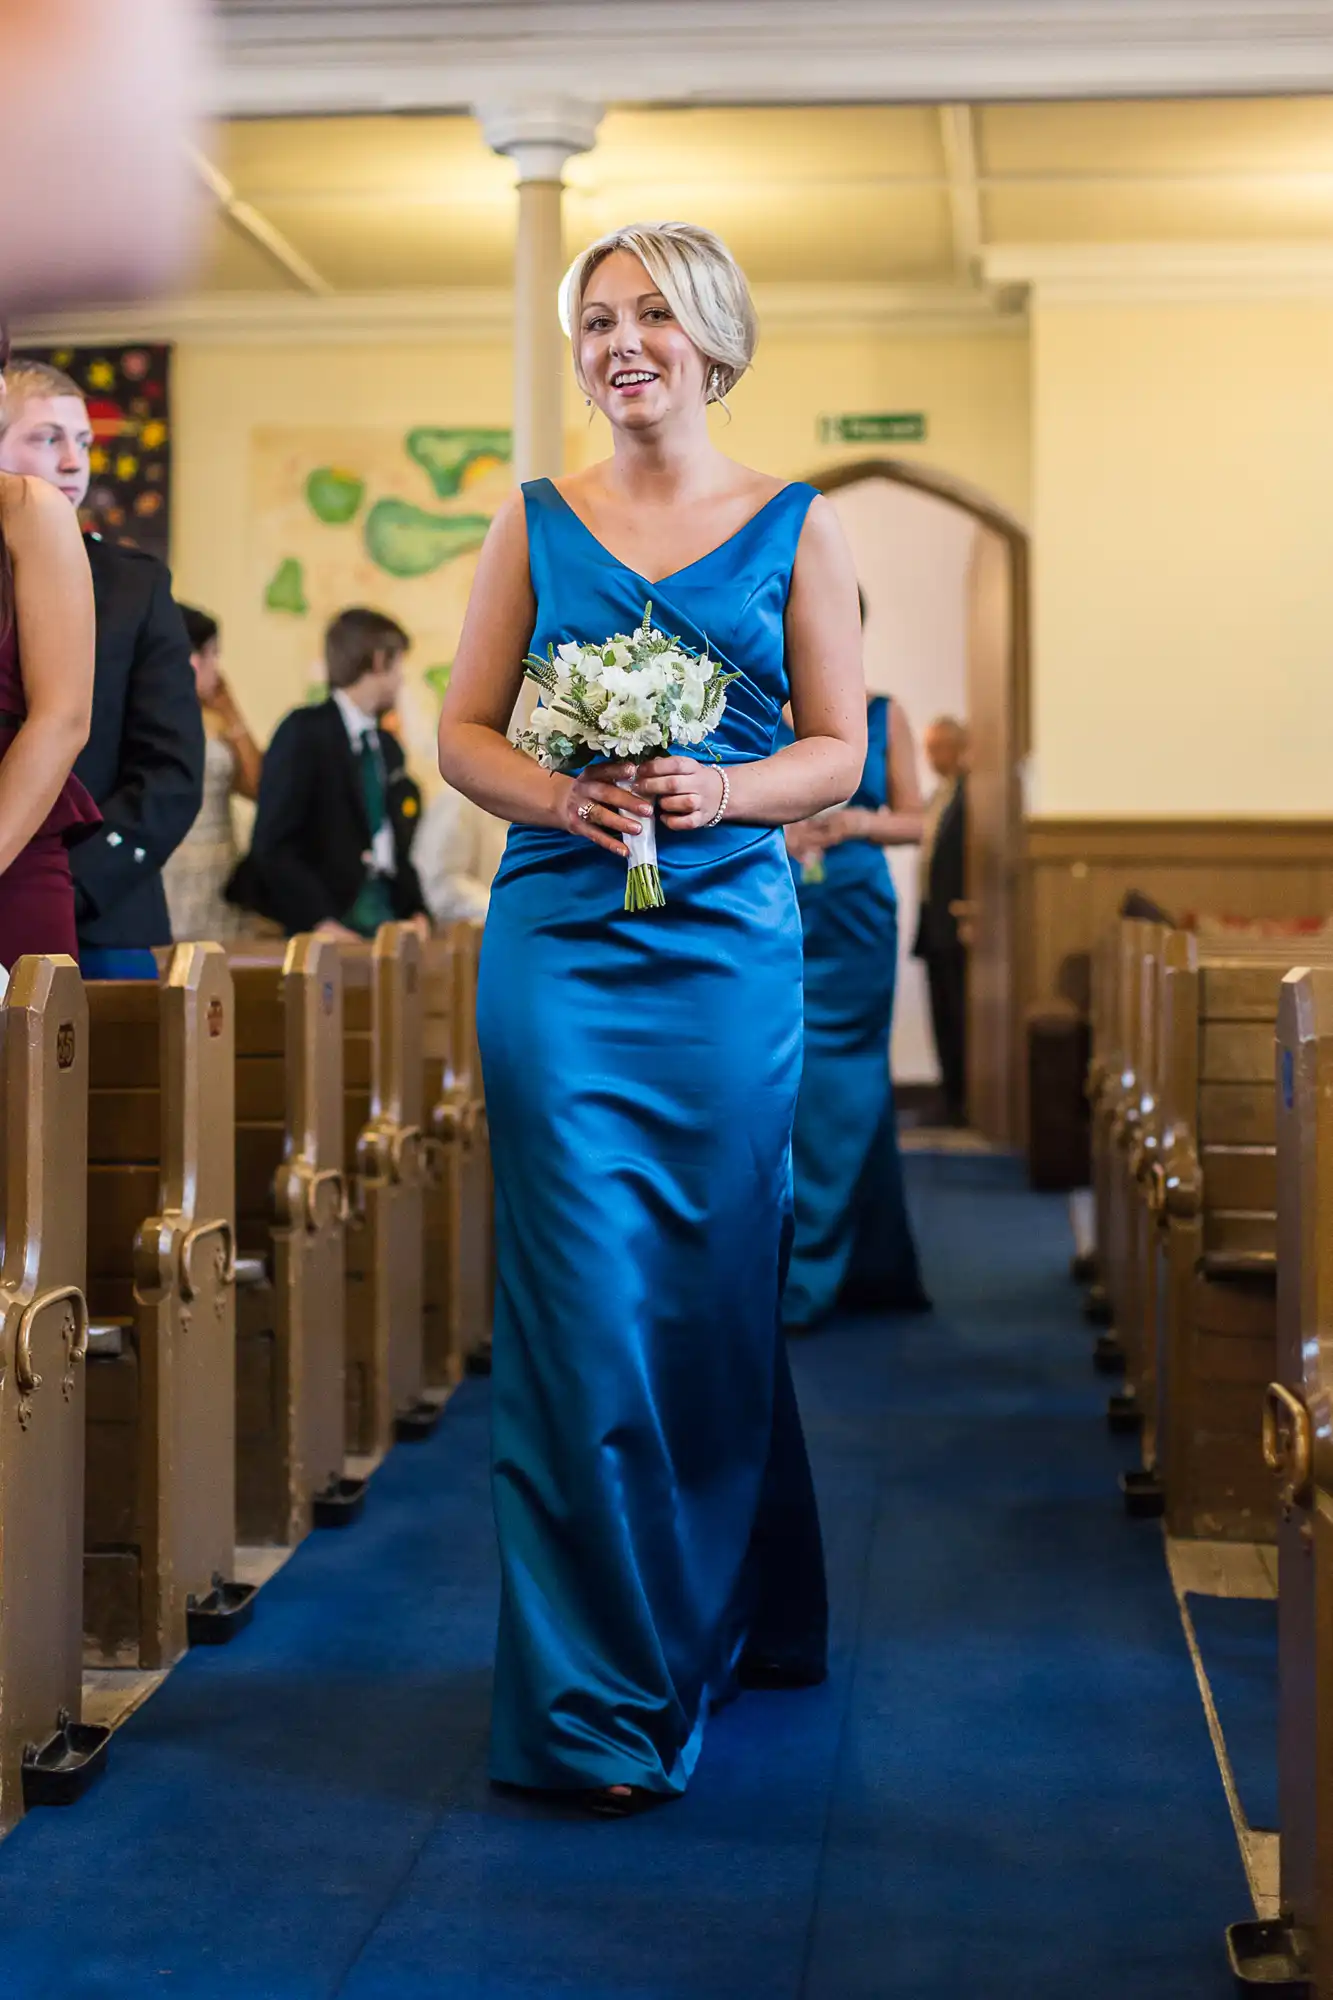 A woman in a blue dress holding a bouquet walks down a church aisle, smiling, with guests in the background.